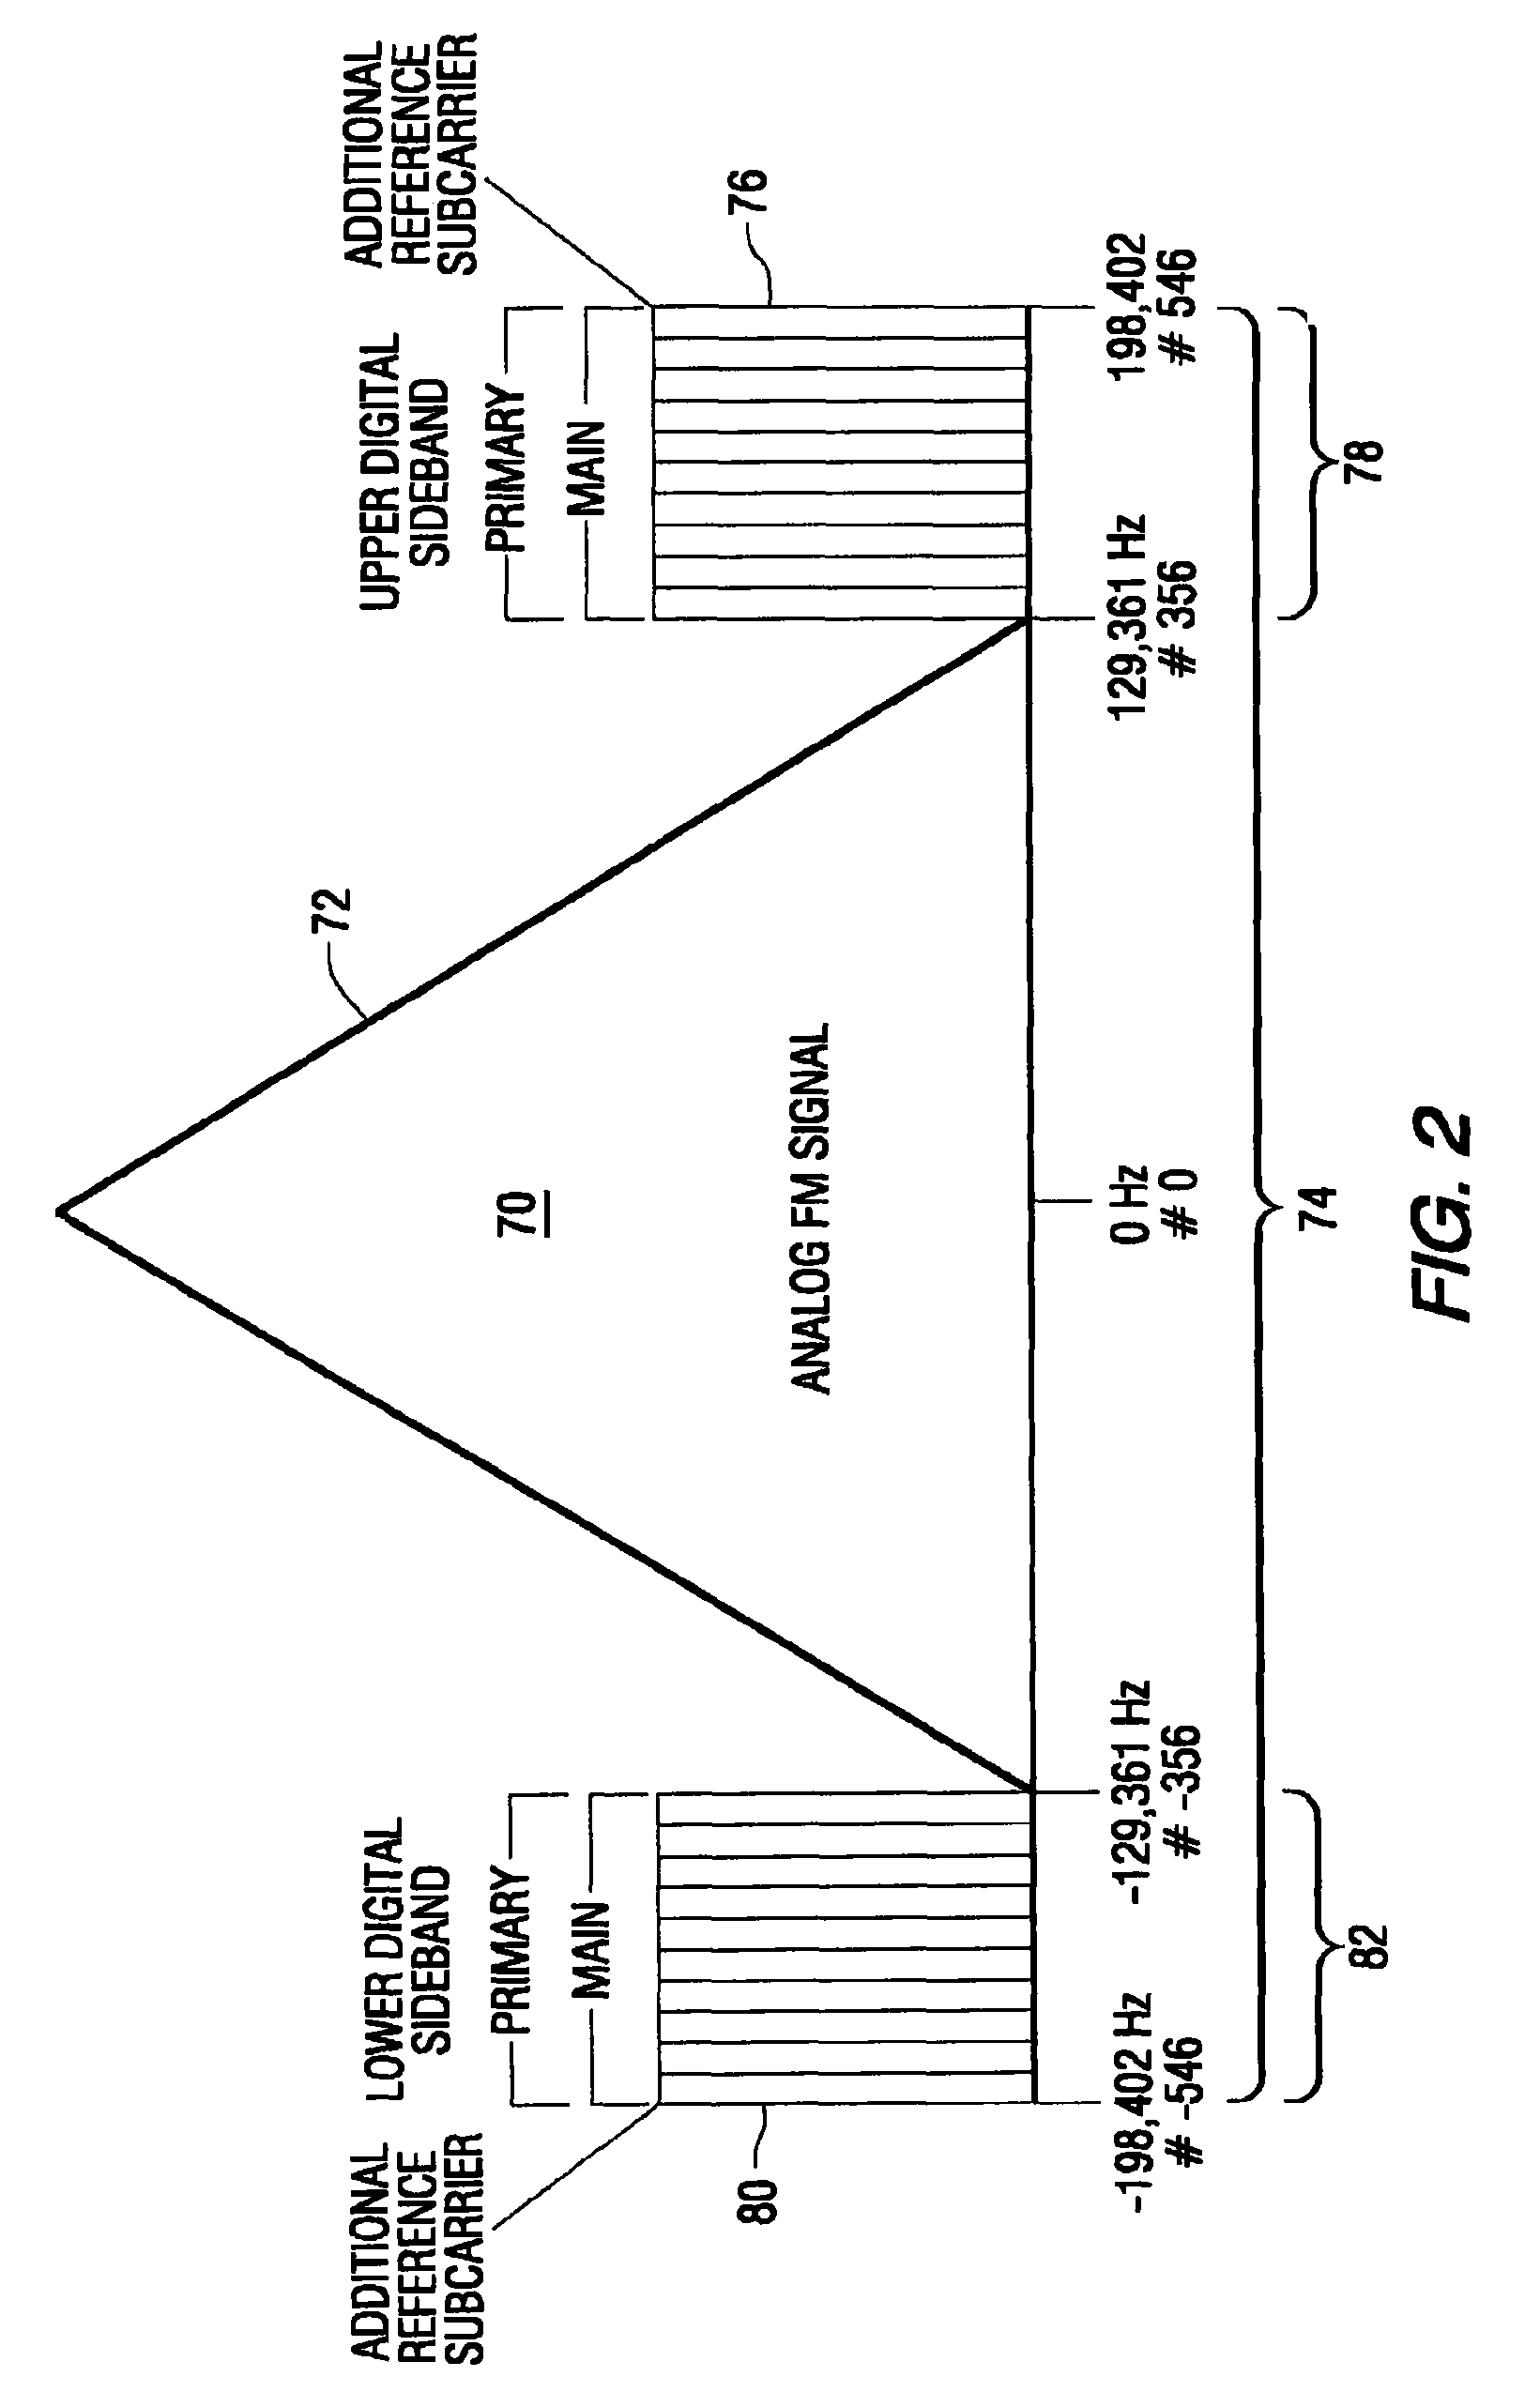 Systems and methods for rendering alert information for digital radio broadcast, and active digital radio broadcast receiver